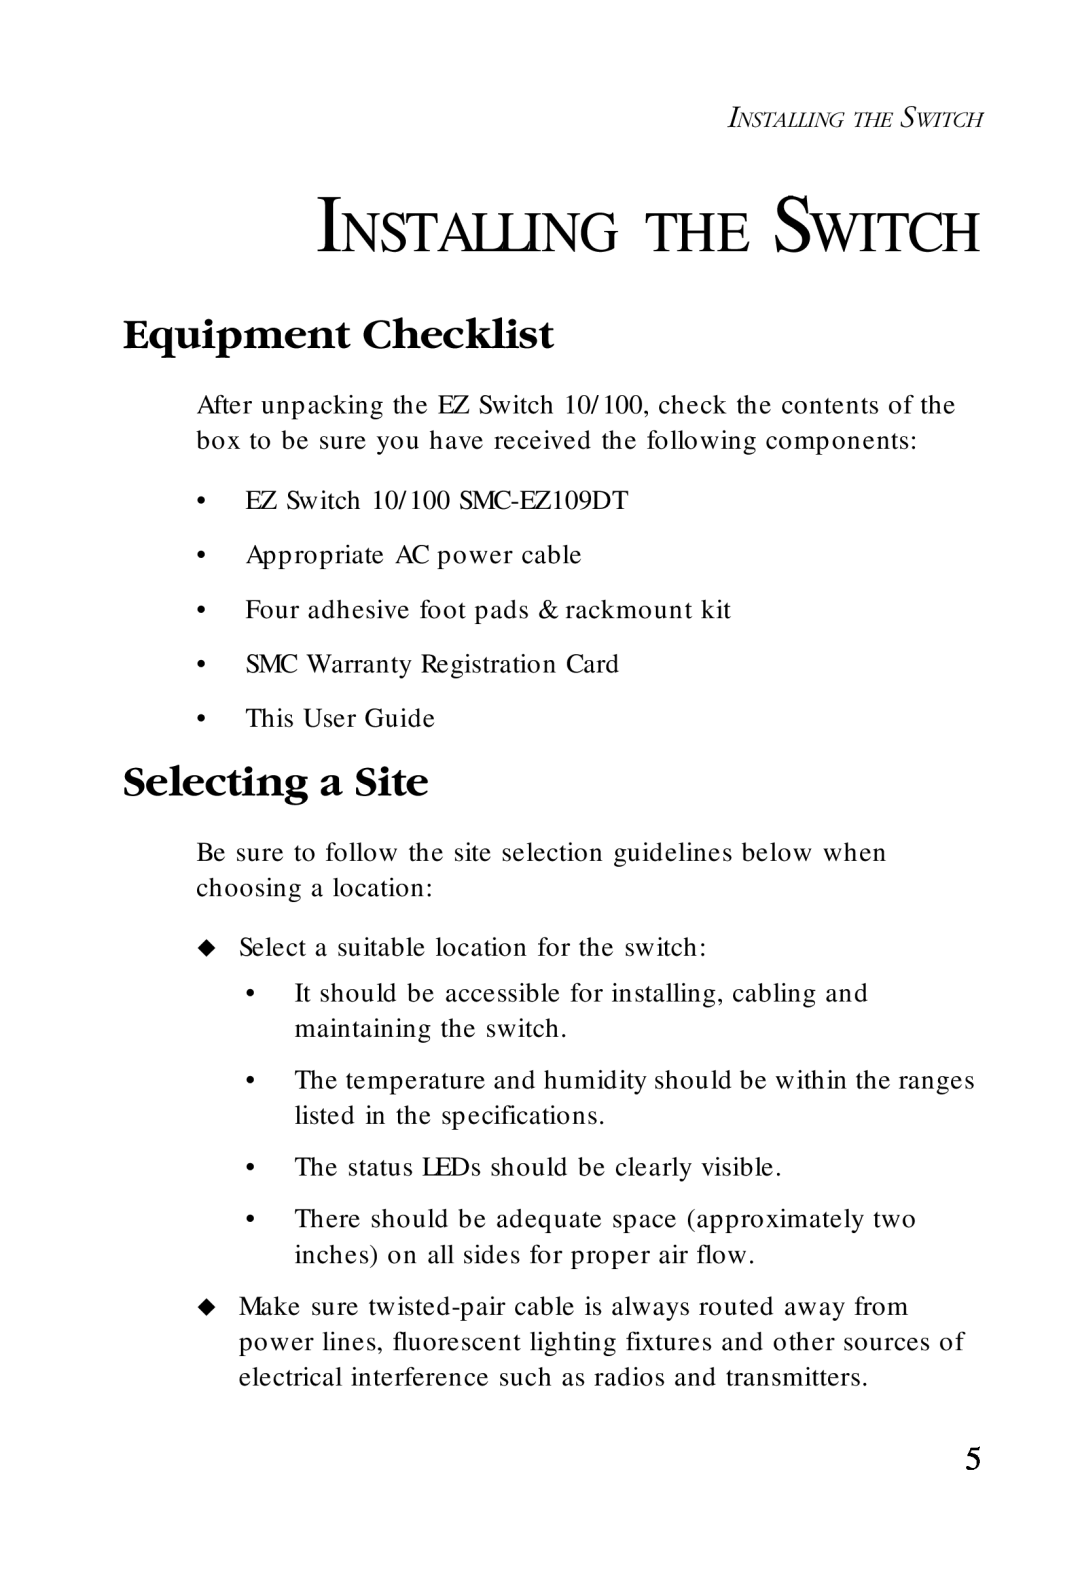 SMC Networks SMC-EZ1024DT manual Installing The Switch, Equipment Checklist, Selecting a Site 